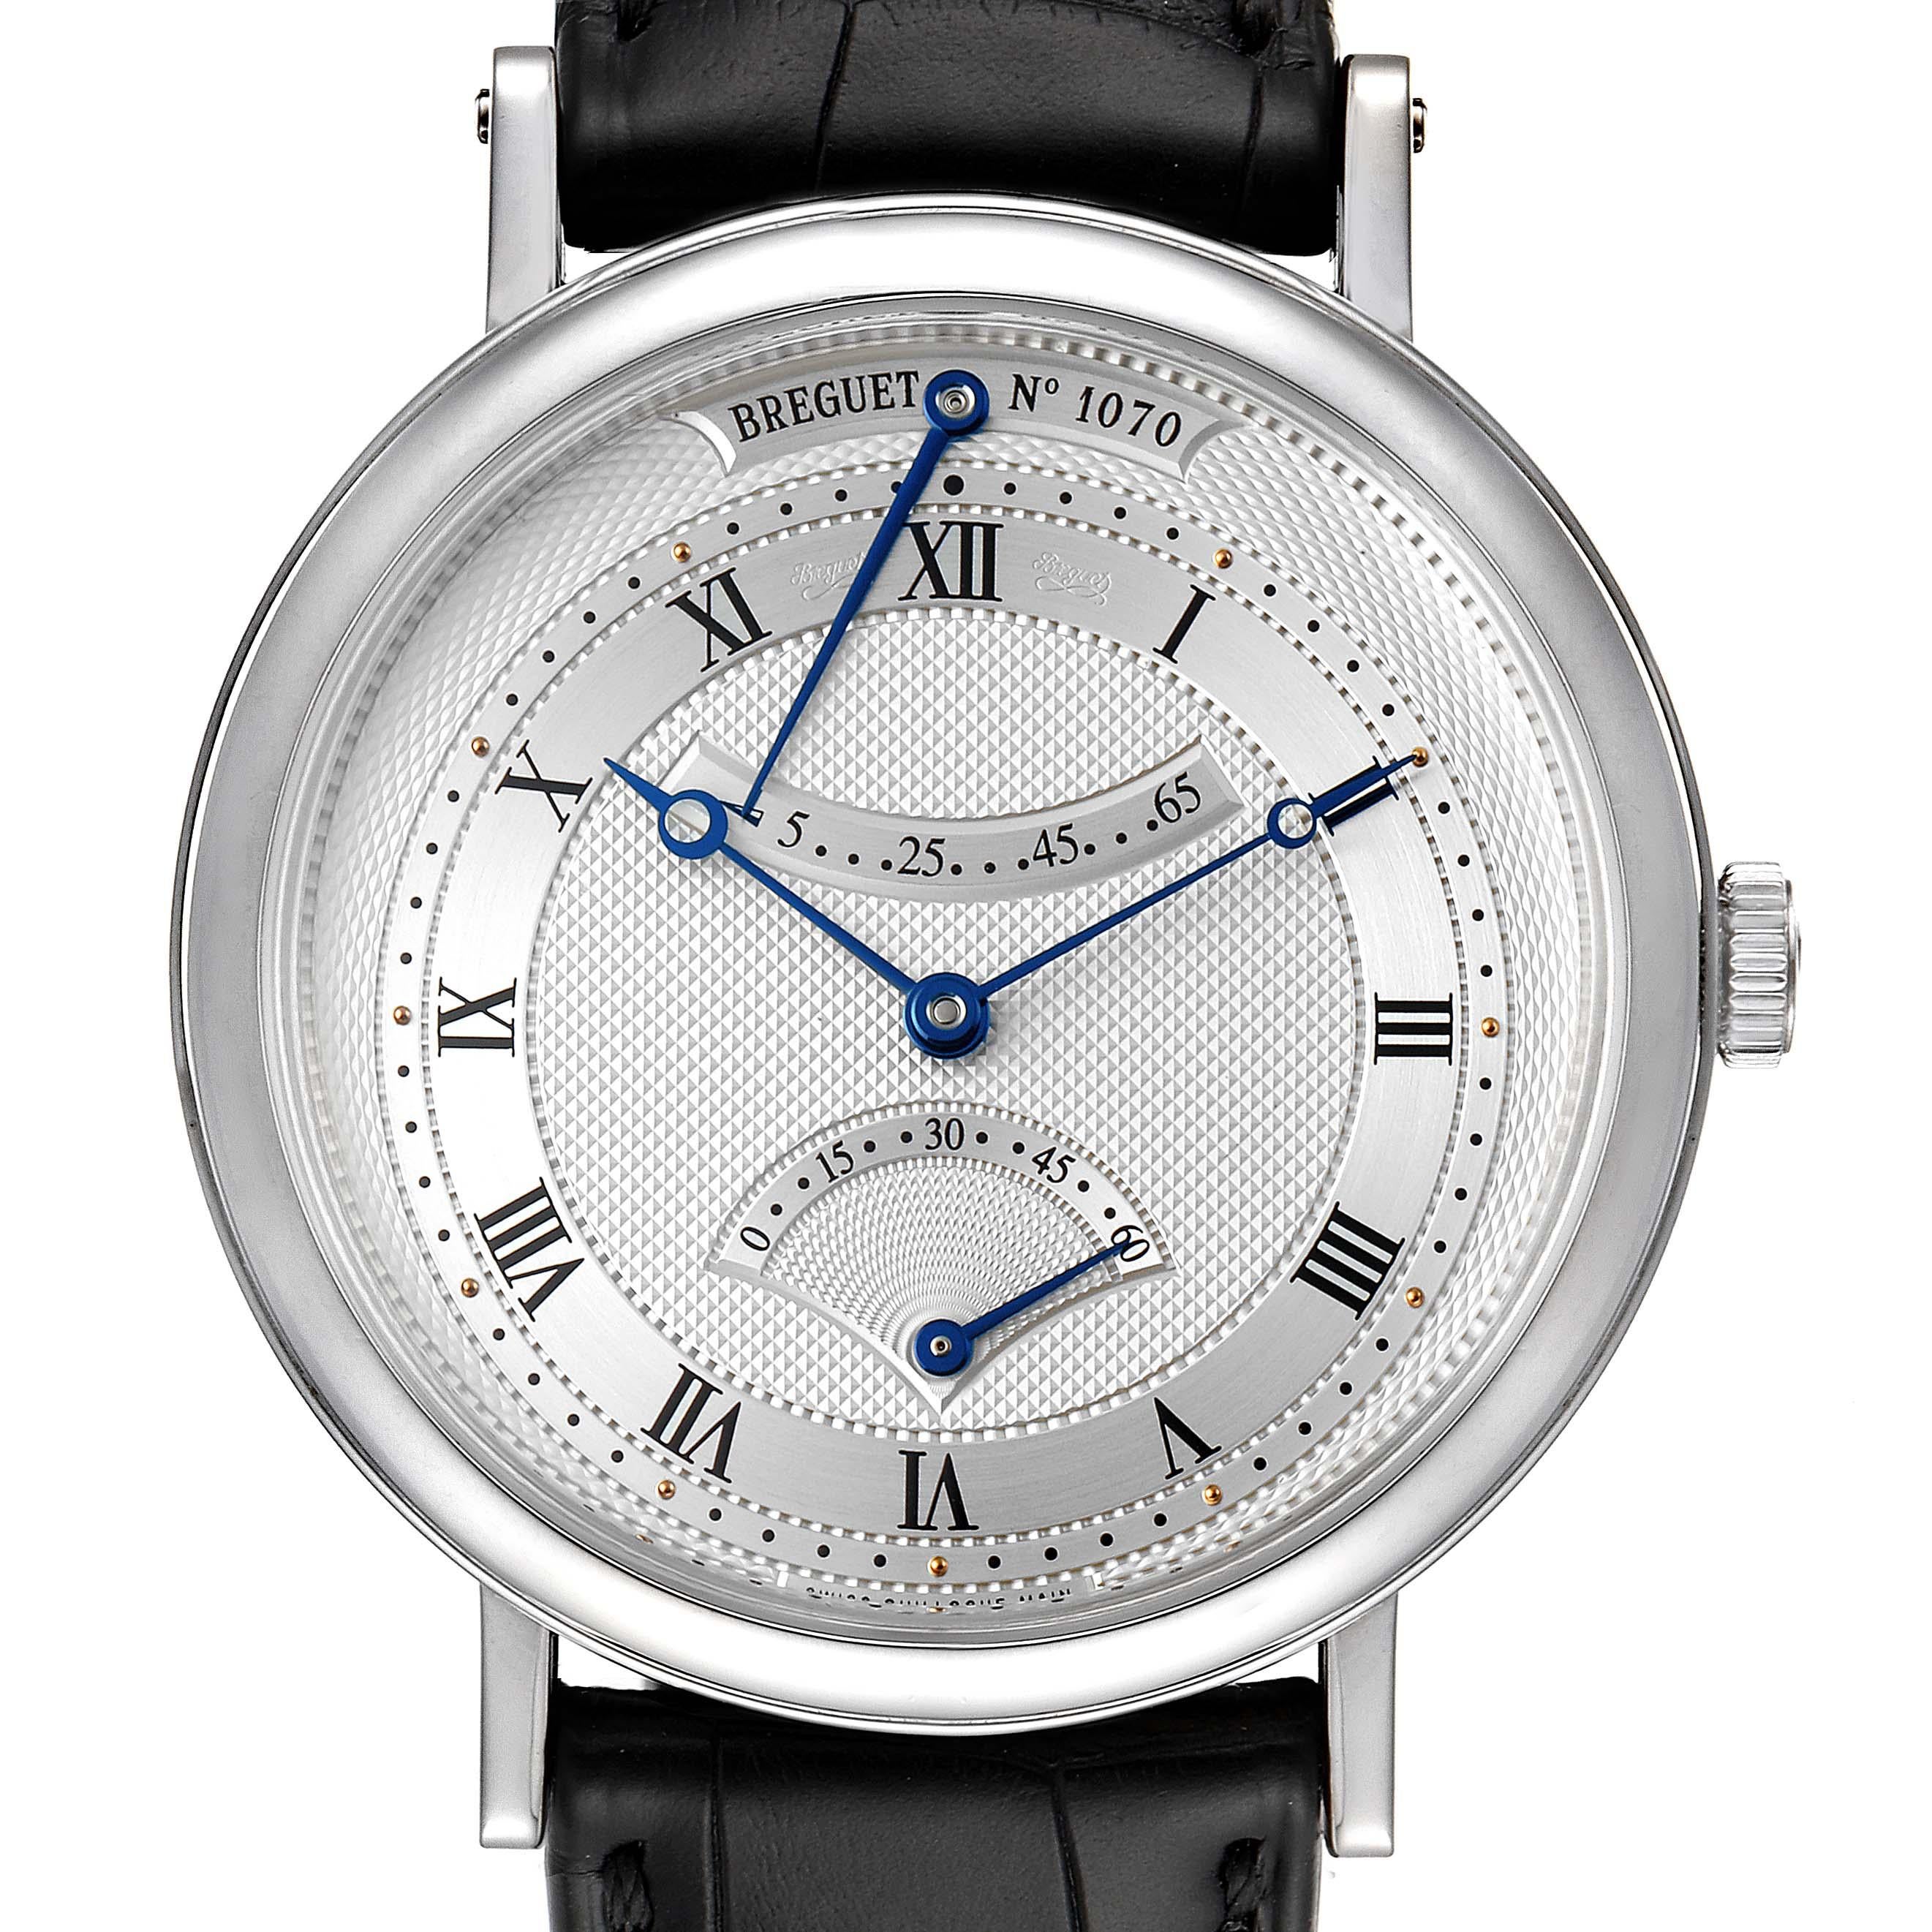 Breguet Classique 18k White Gold Retrograde Seconds Watch 5207 Box Papers. Automatic self-winding movement. 18K white gold coined edged case 39.0 mm in diameter. Exhibition case back. Straight lugs with screwed gold bars. Case thicknes 9.85mm. 18K